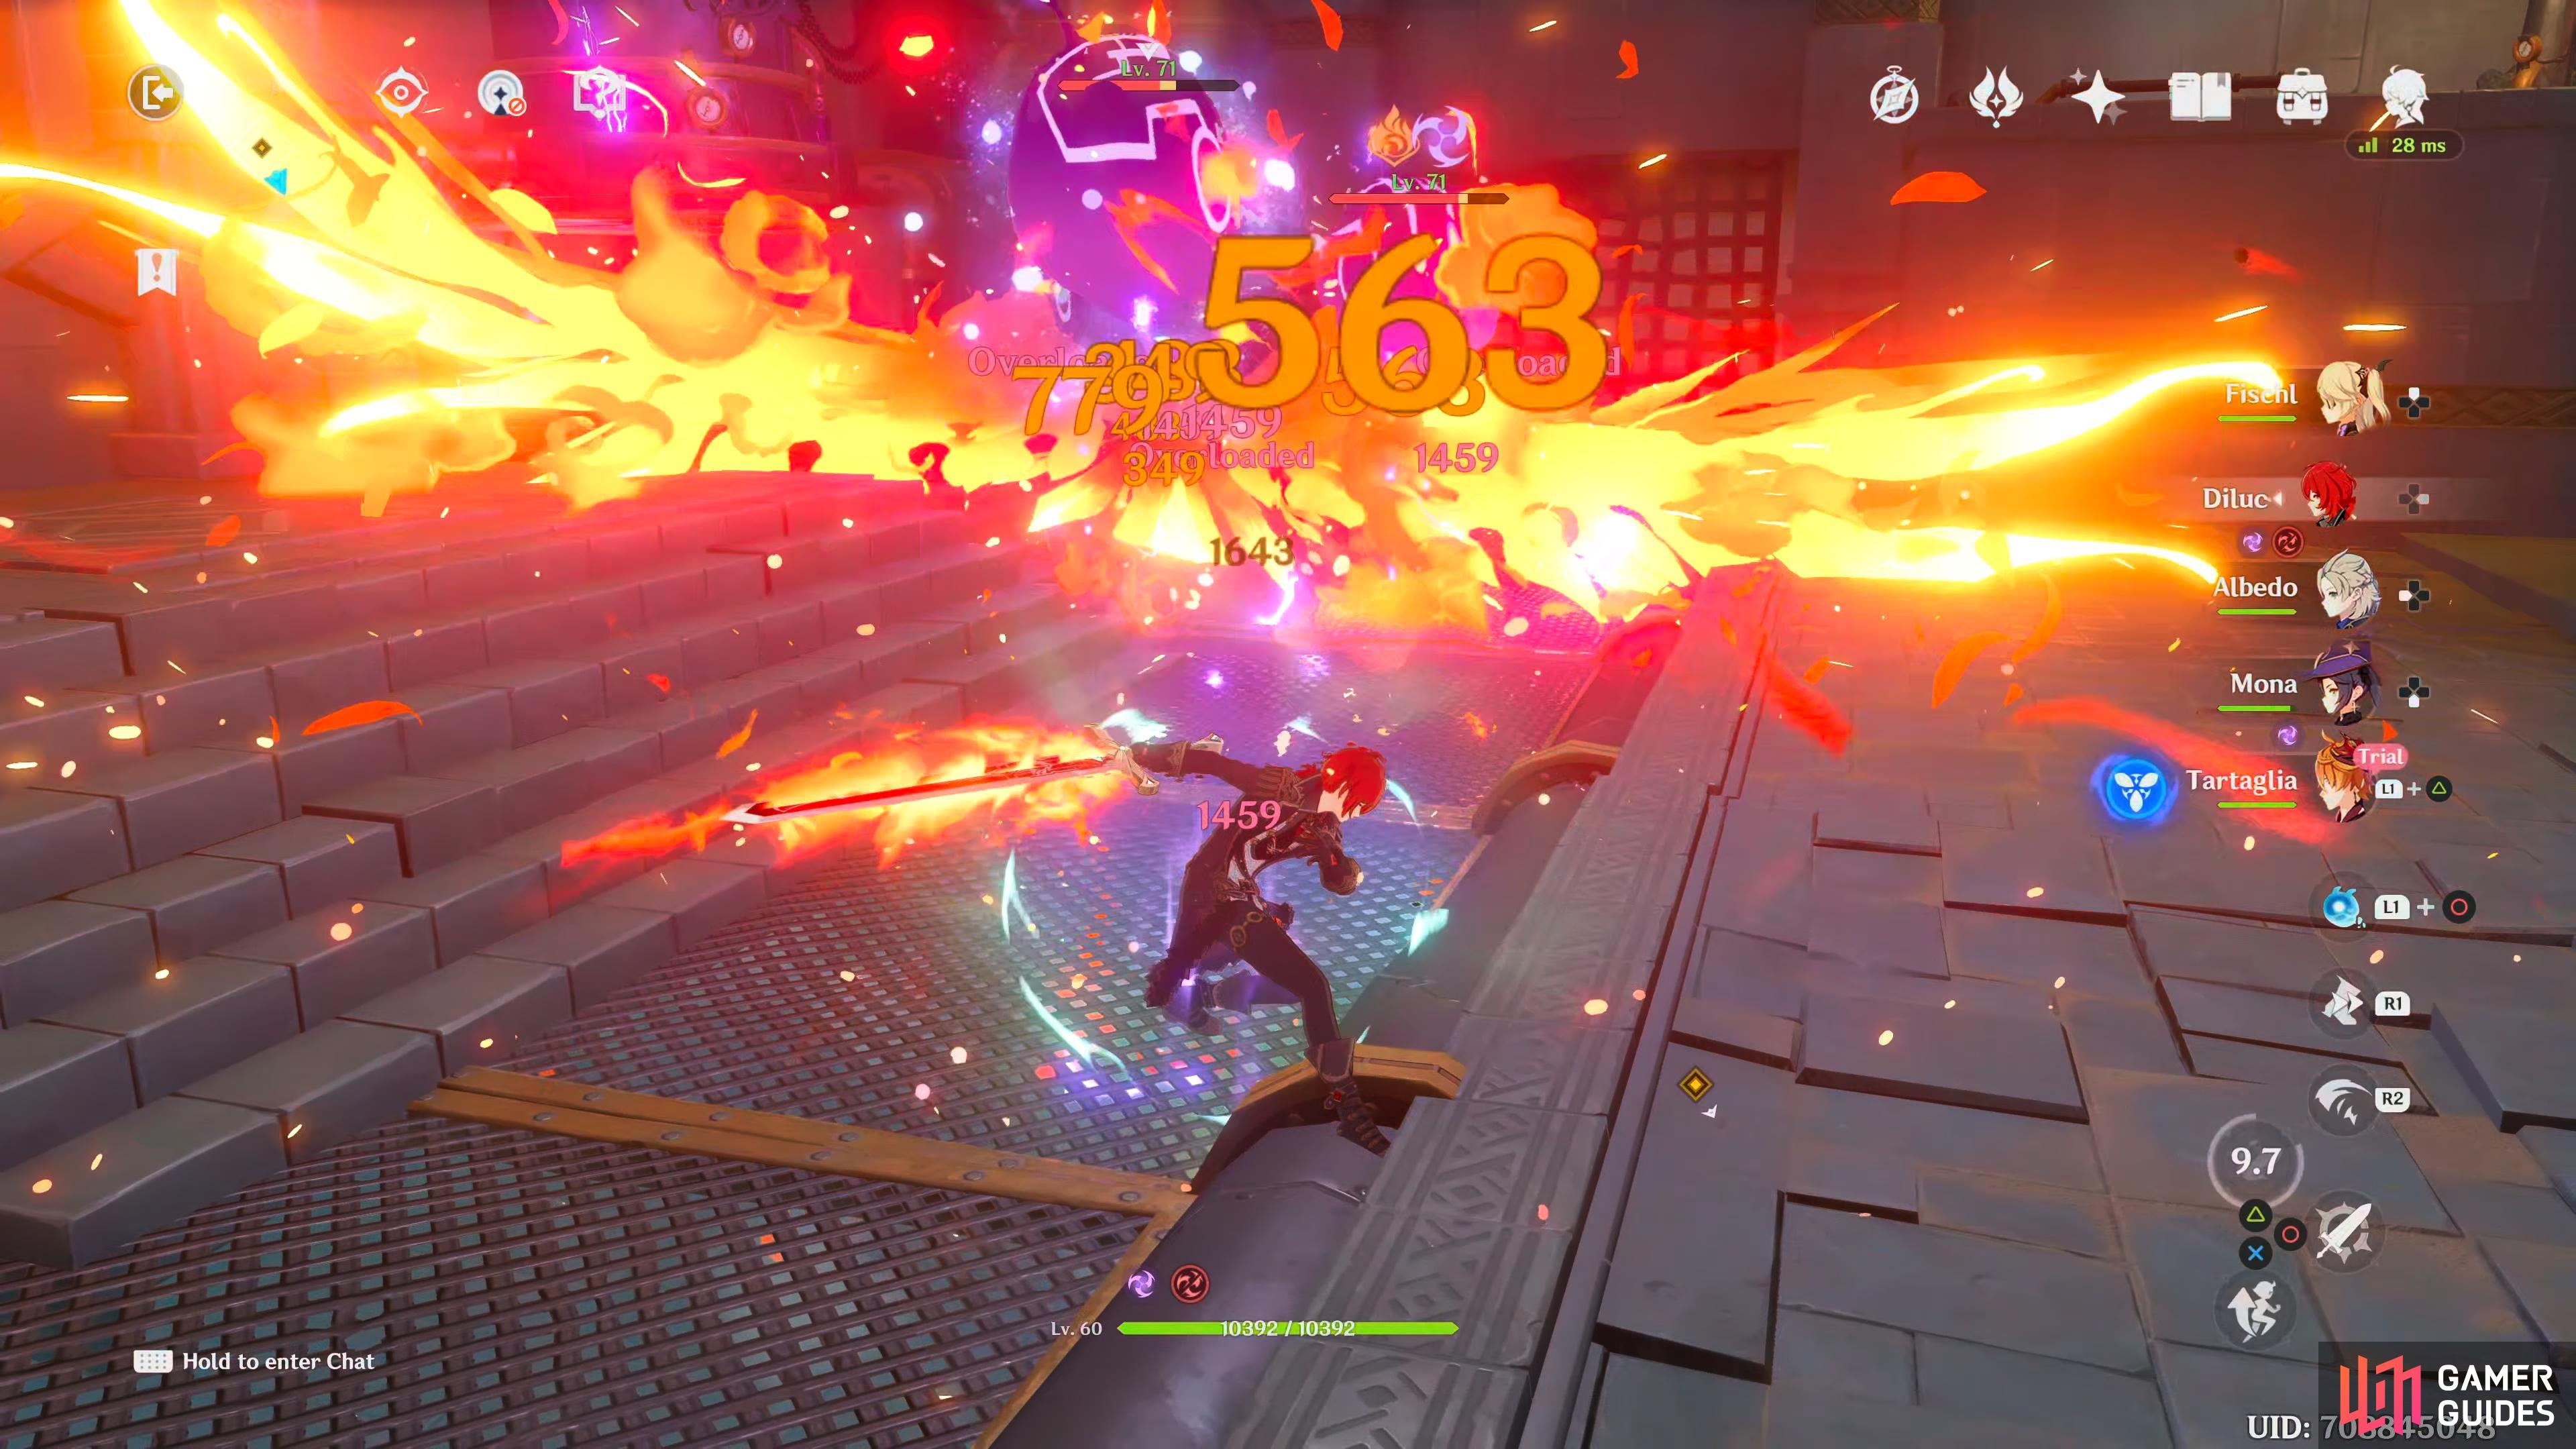 use Pyro against the Electro Slimes for major damage